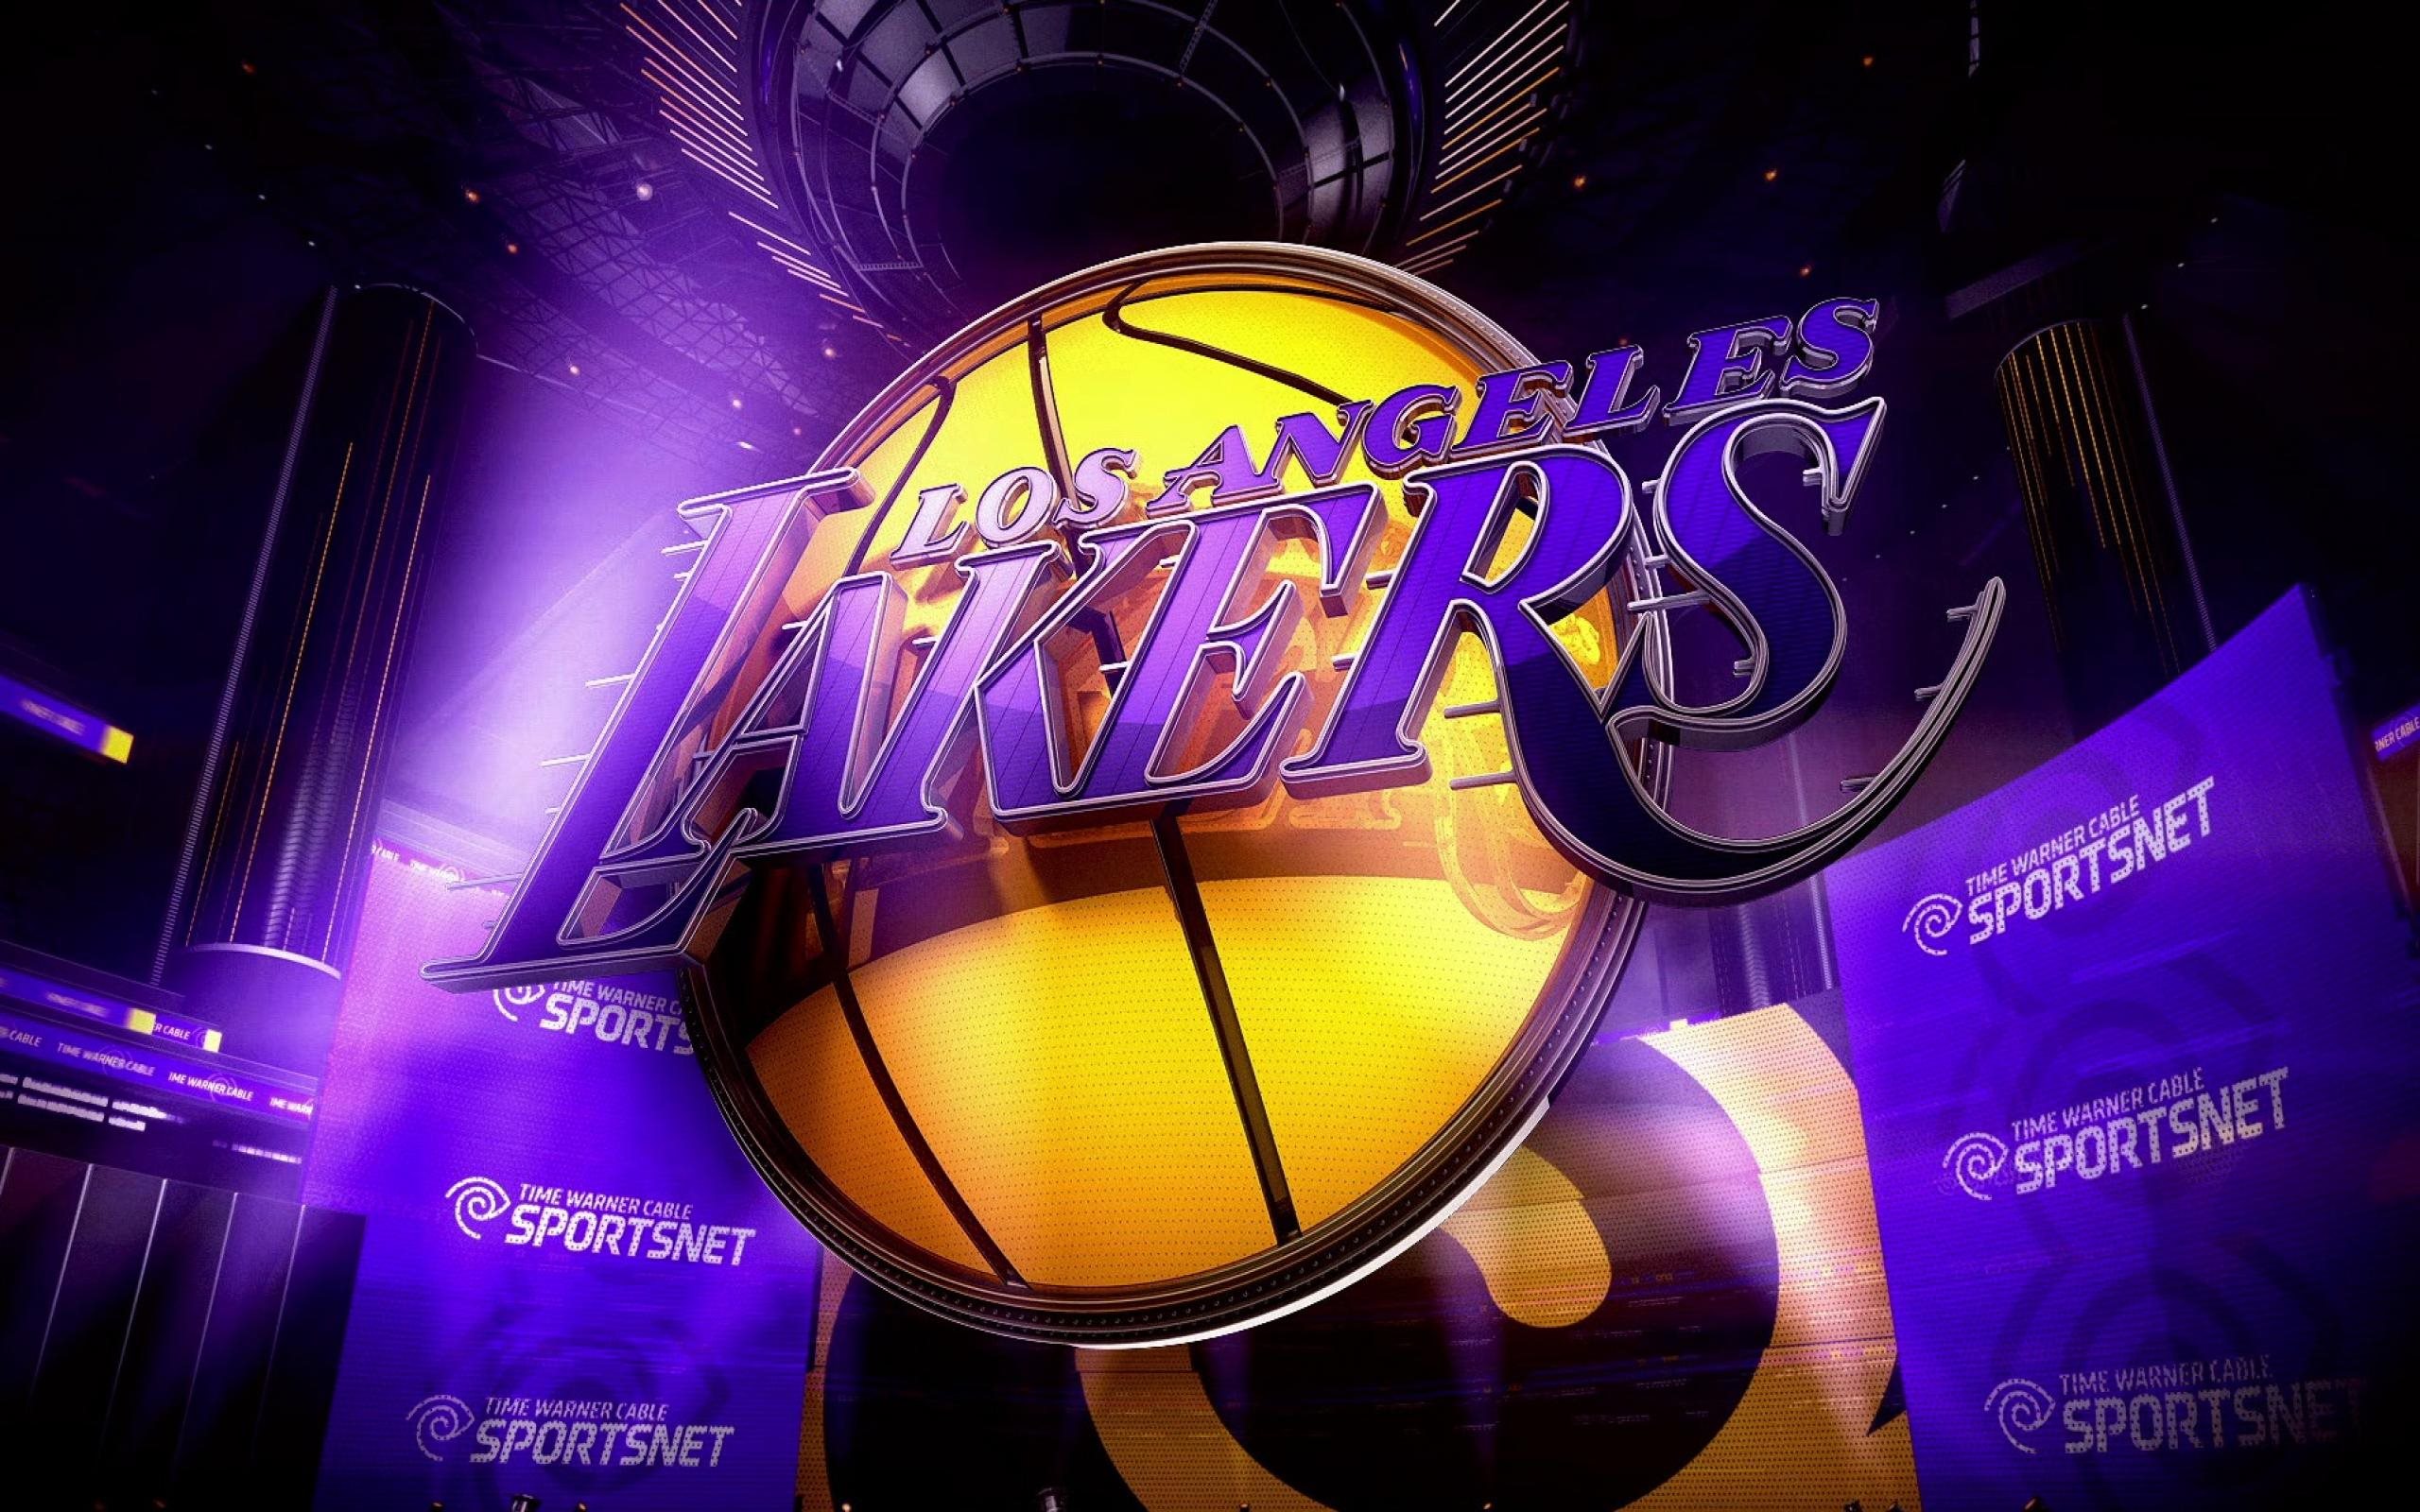 Los Angeles Lakers HD Wallpaper and Background